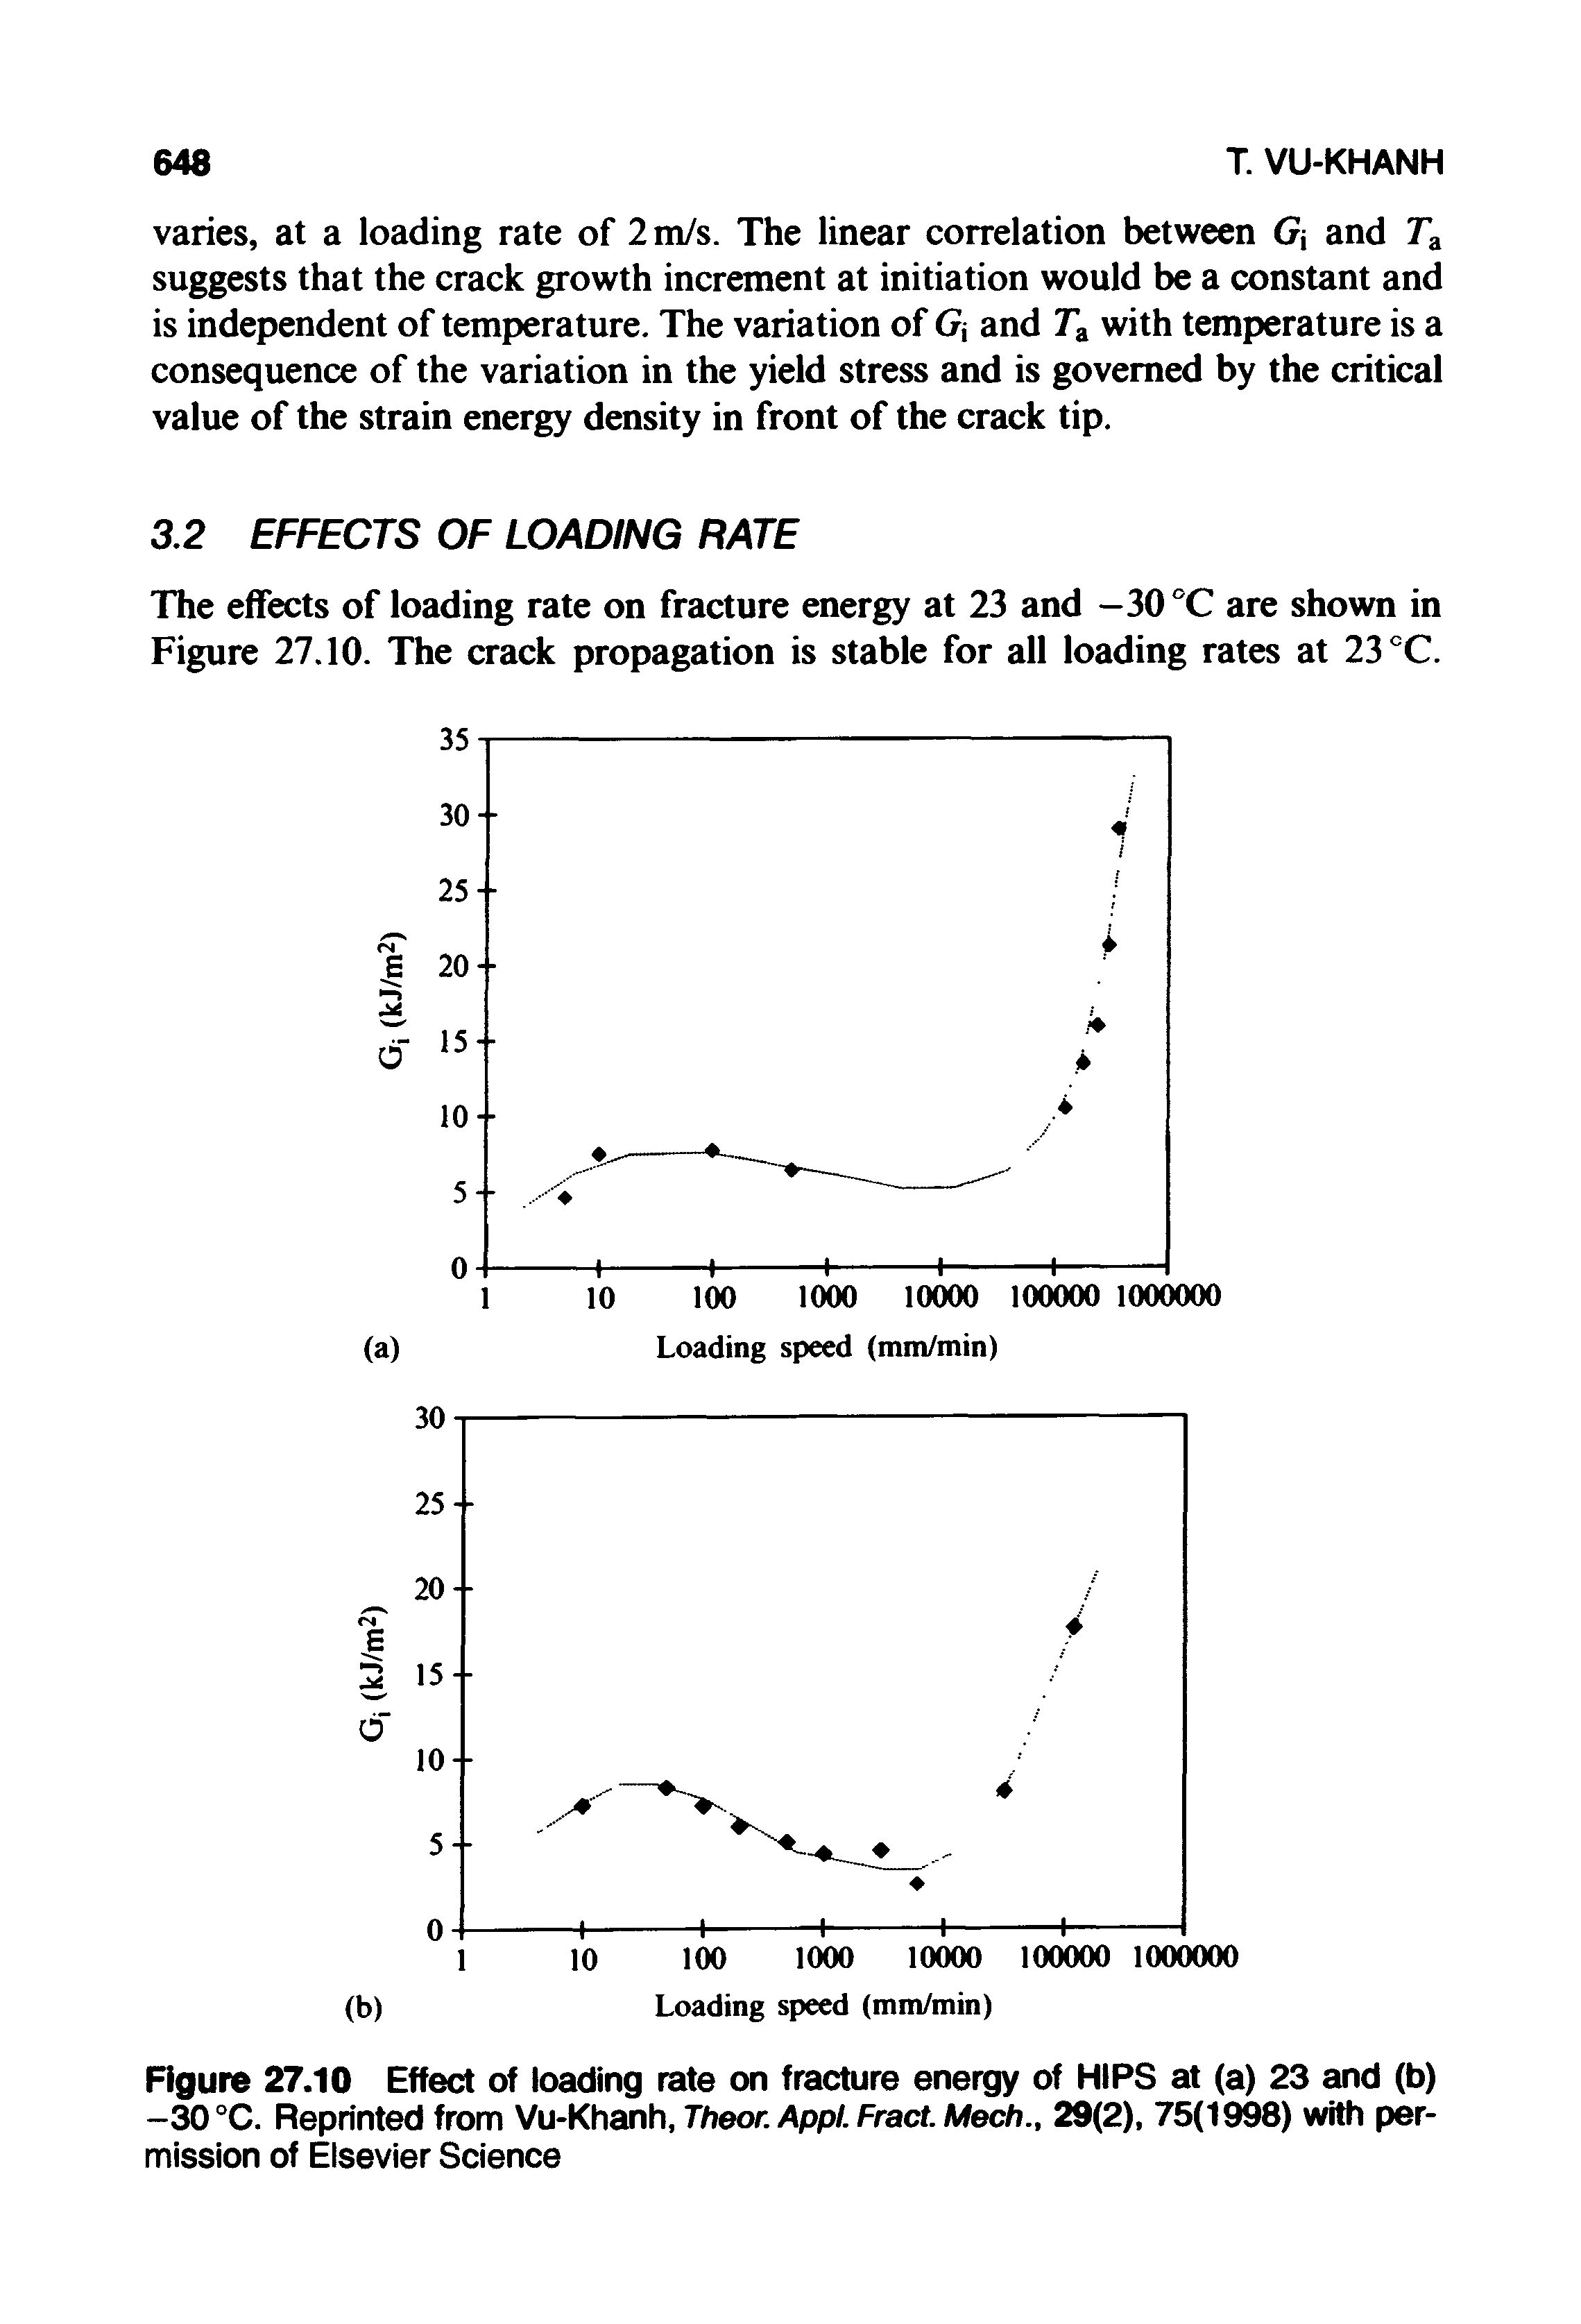 Figure 27.10 Effect of loading rate on fracture energy of HIPS at (a) 23 and (b) -30 °C. Reprinted from Vu-Khanh, Theor. Appl. Fract. Mech., 29(2), 75(1998) with permission of Elsevier Science...